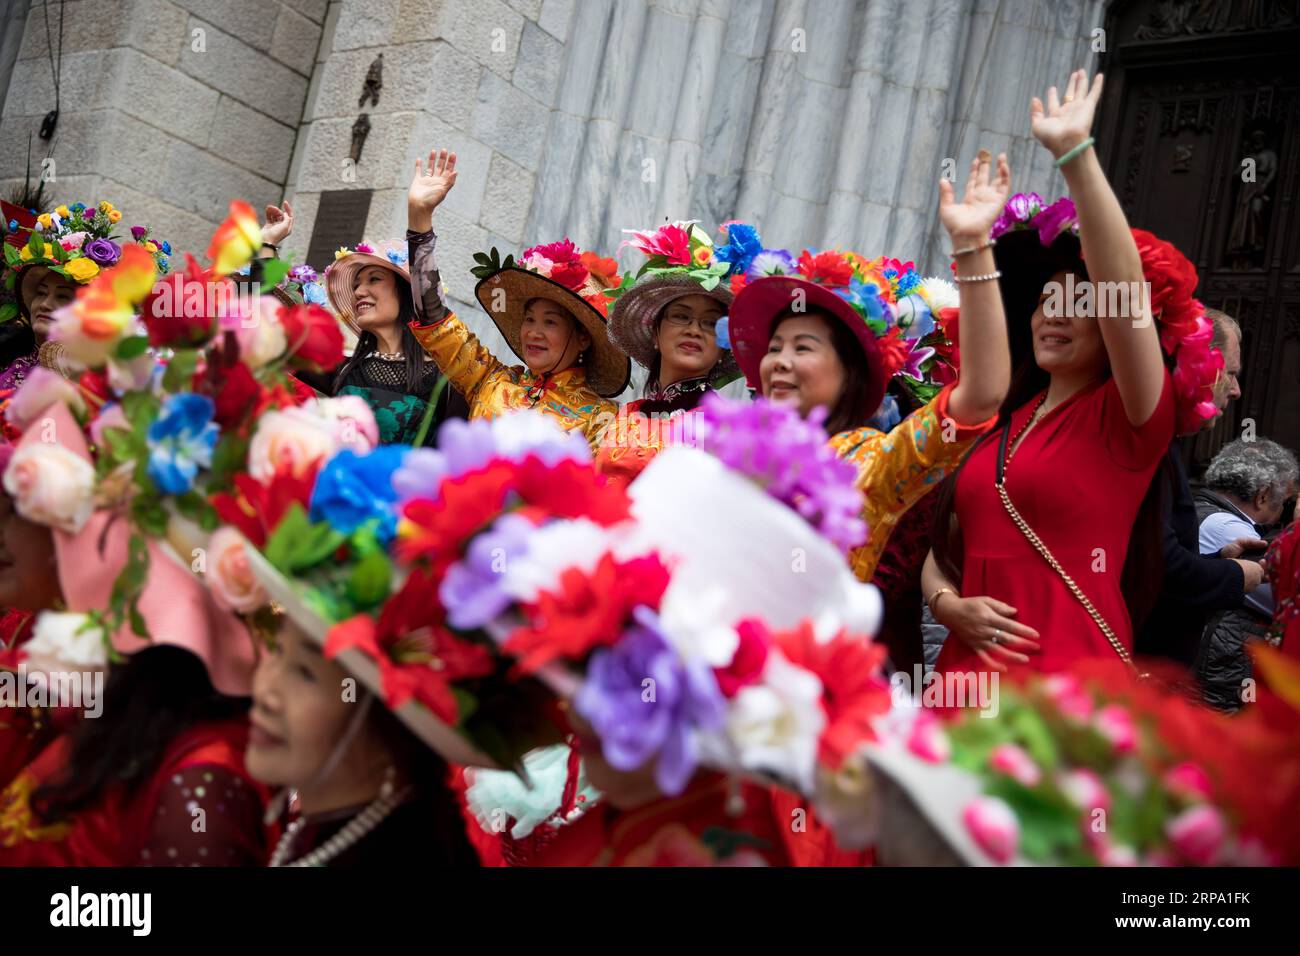 (190421) -- NEW YORK, April 21, 2019 -- Members of the Chinese Qipao Society of New York pose for photographs during the annual Easter Parade and Easter Bonnet Festival in New York, the United States, April 21, 2019. Adults, children and even pets in creative colorful bonnets and outfits participated in the annual Easter Parade and Easter Bonnet Festival in New York on Sunday, which attracted thousands of local residents and tourists. The pageant is a New York City tradition that stretches back to the 1870s. ) U.S.-NEW YORK-EASTER PARADE-BONNET FESTIVAL MichaelxNagle PUBLICATIONxNOTxINxCHN Stock Photo